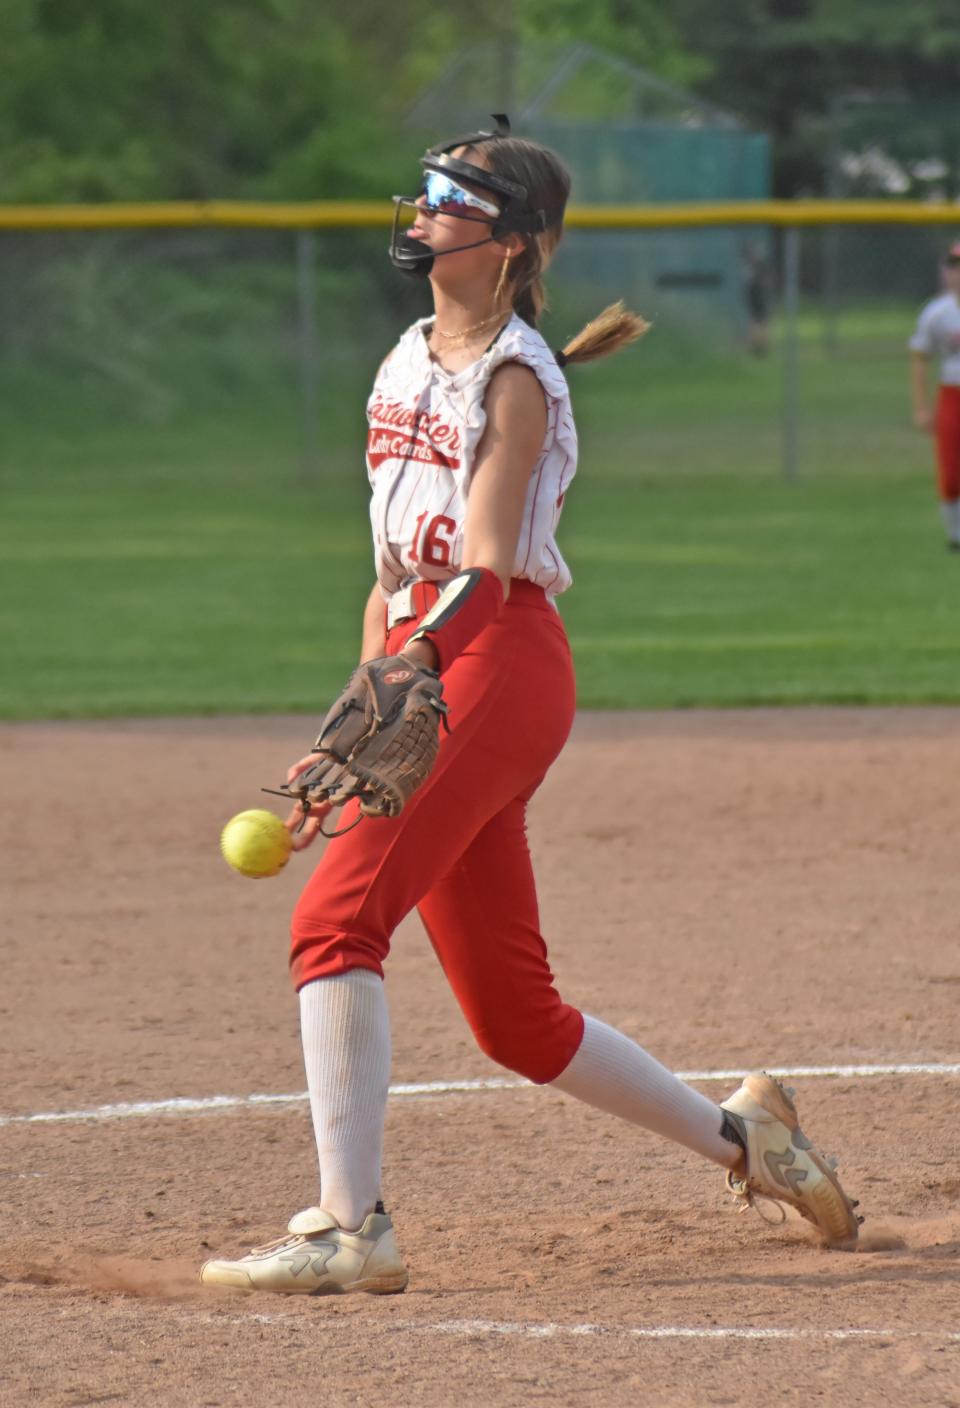 Coldwater freshman Mya Porter pitched strong in a tough spot Monday, securing the win on the mound in the Cardinals game two win